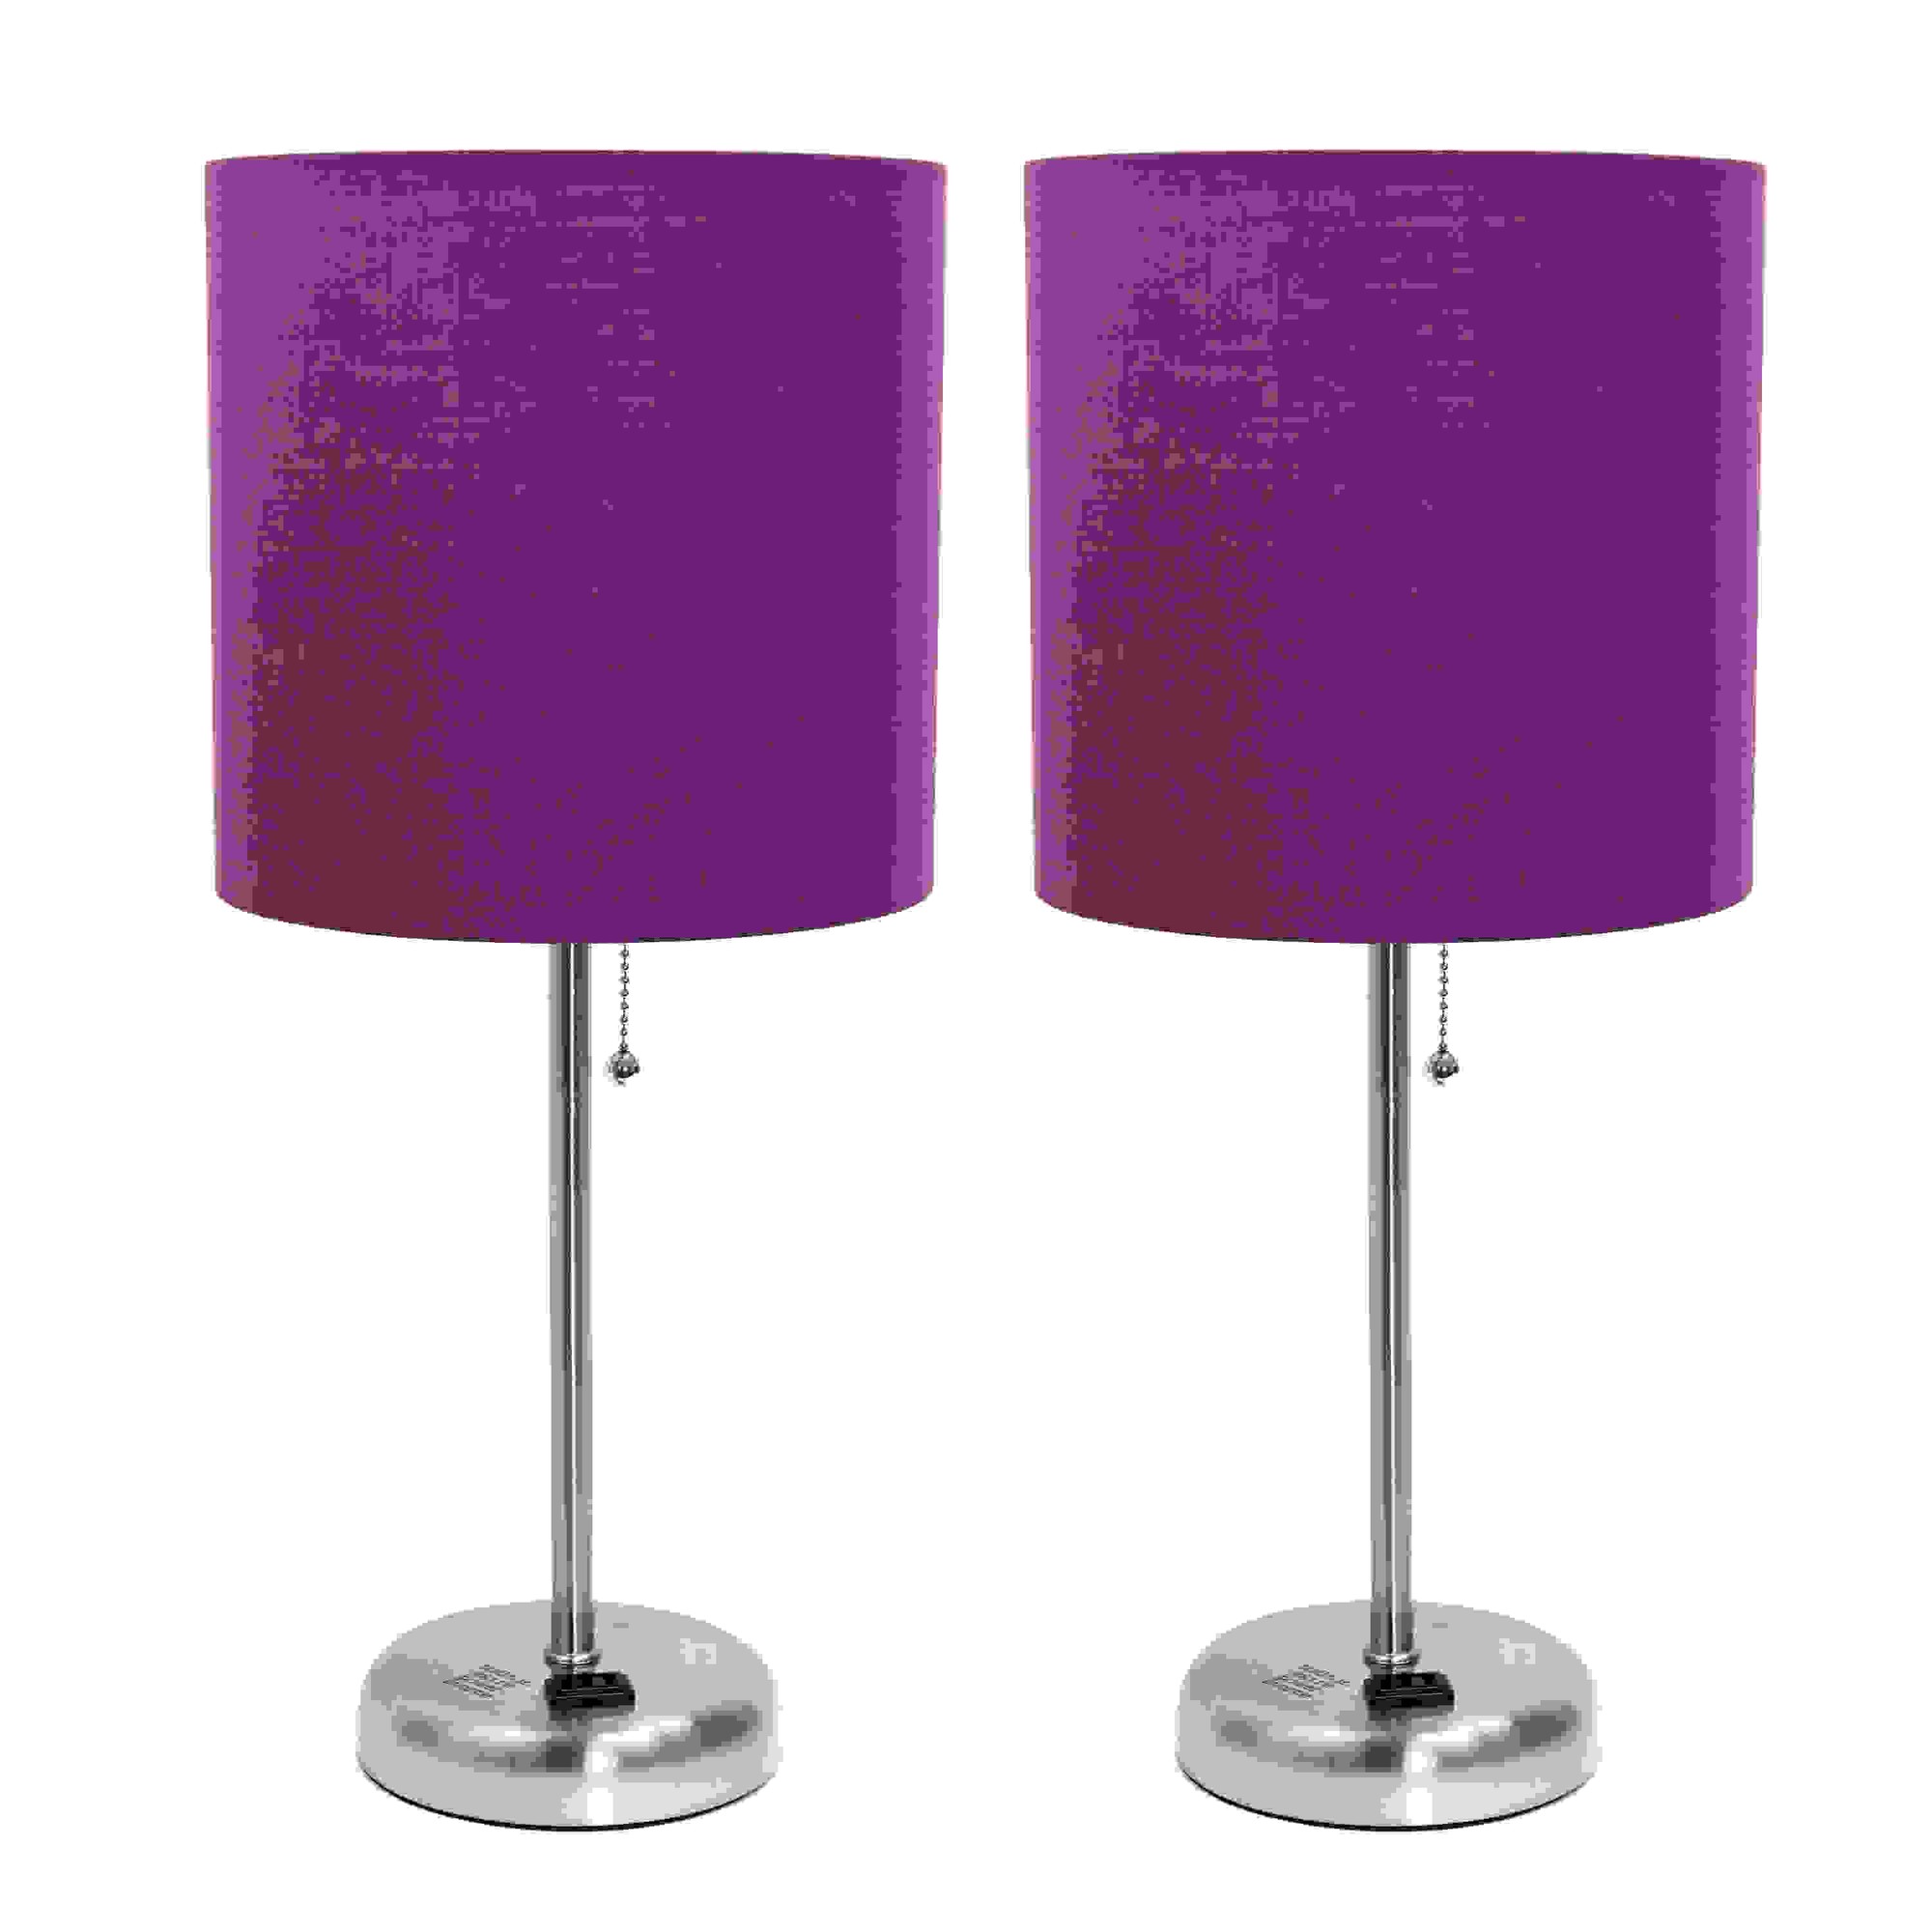 Simple Designs Brushed Steel Stick Lamp with Charging Outlet and Fabric Shade 2 Pack Set, Purple